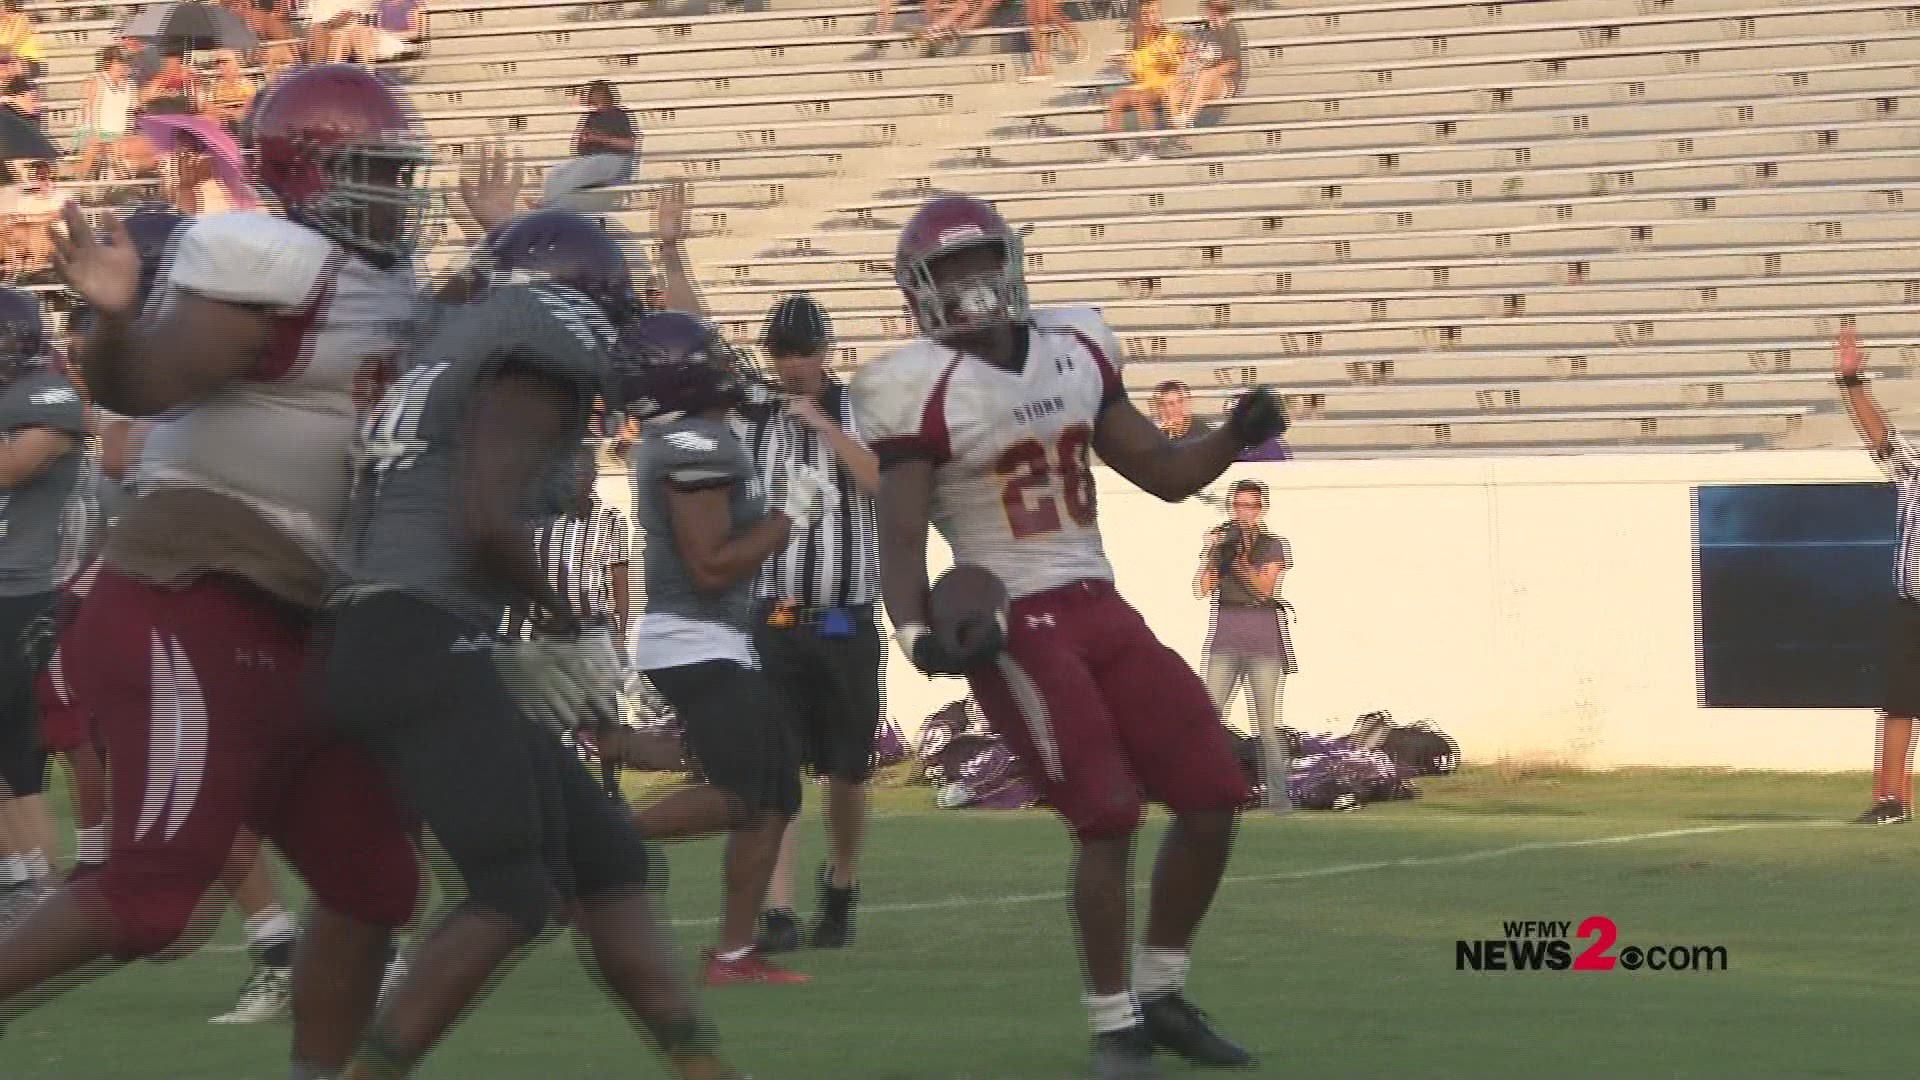 Friday Football Fever returns with the DJ Reader Jamboree. Check out highlights from Northern vs Southern